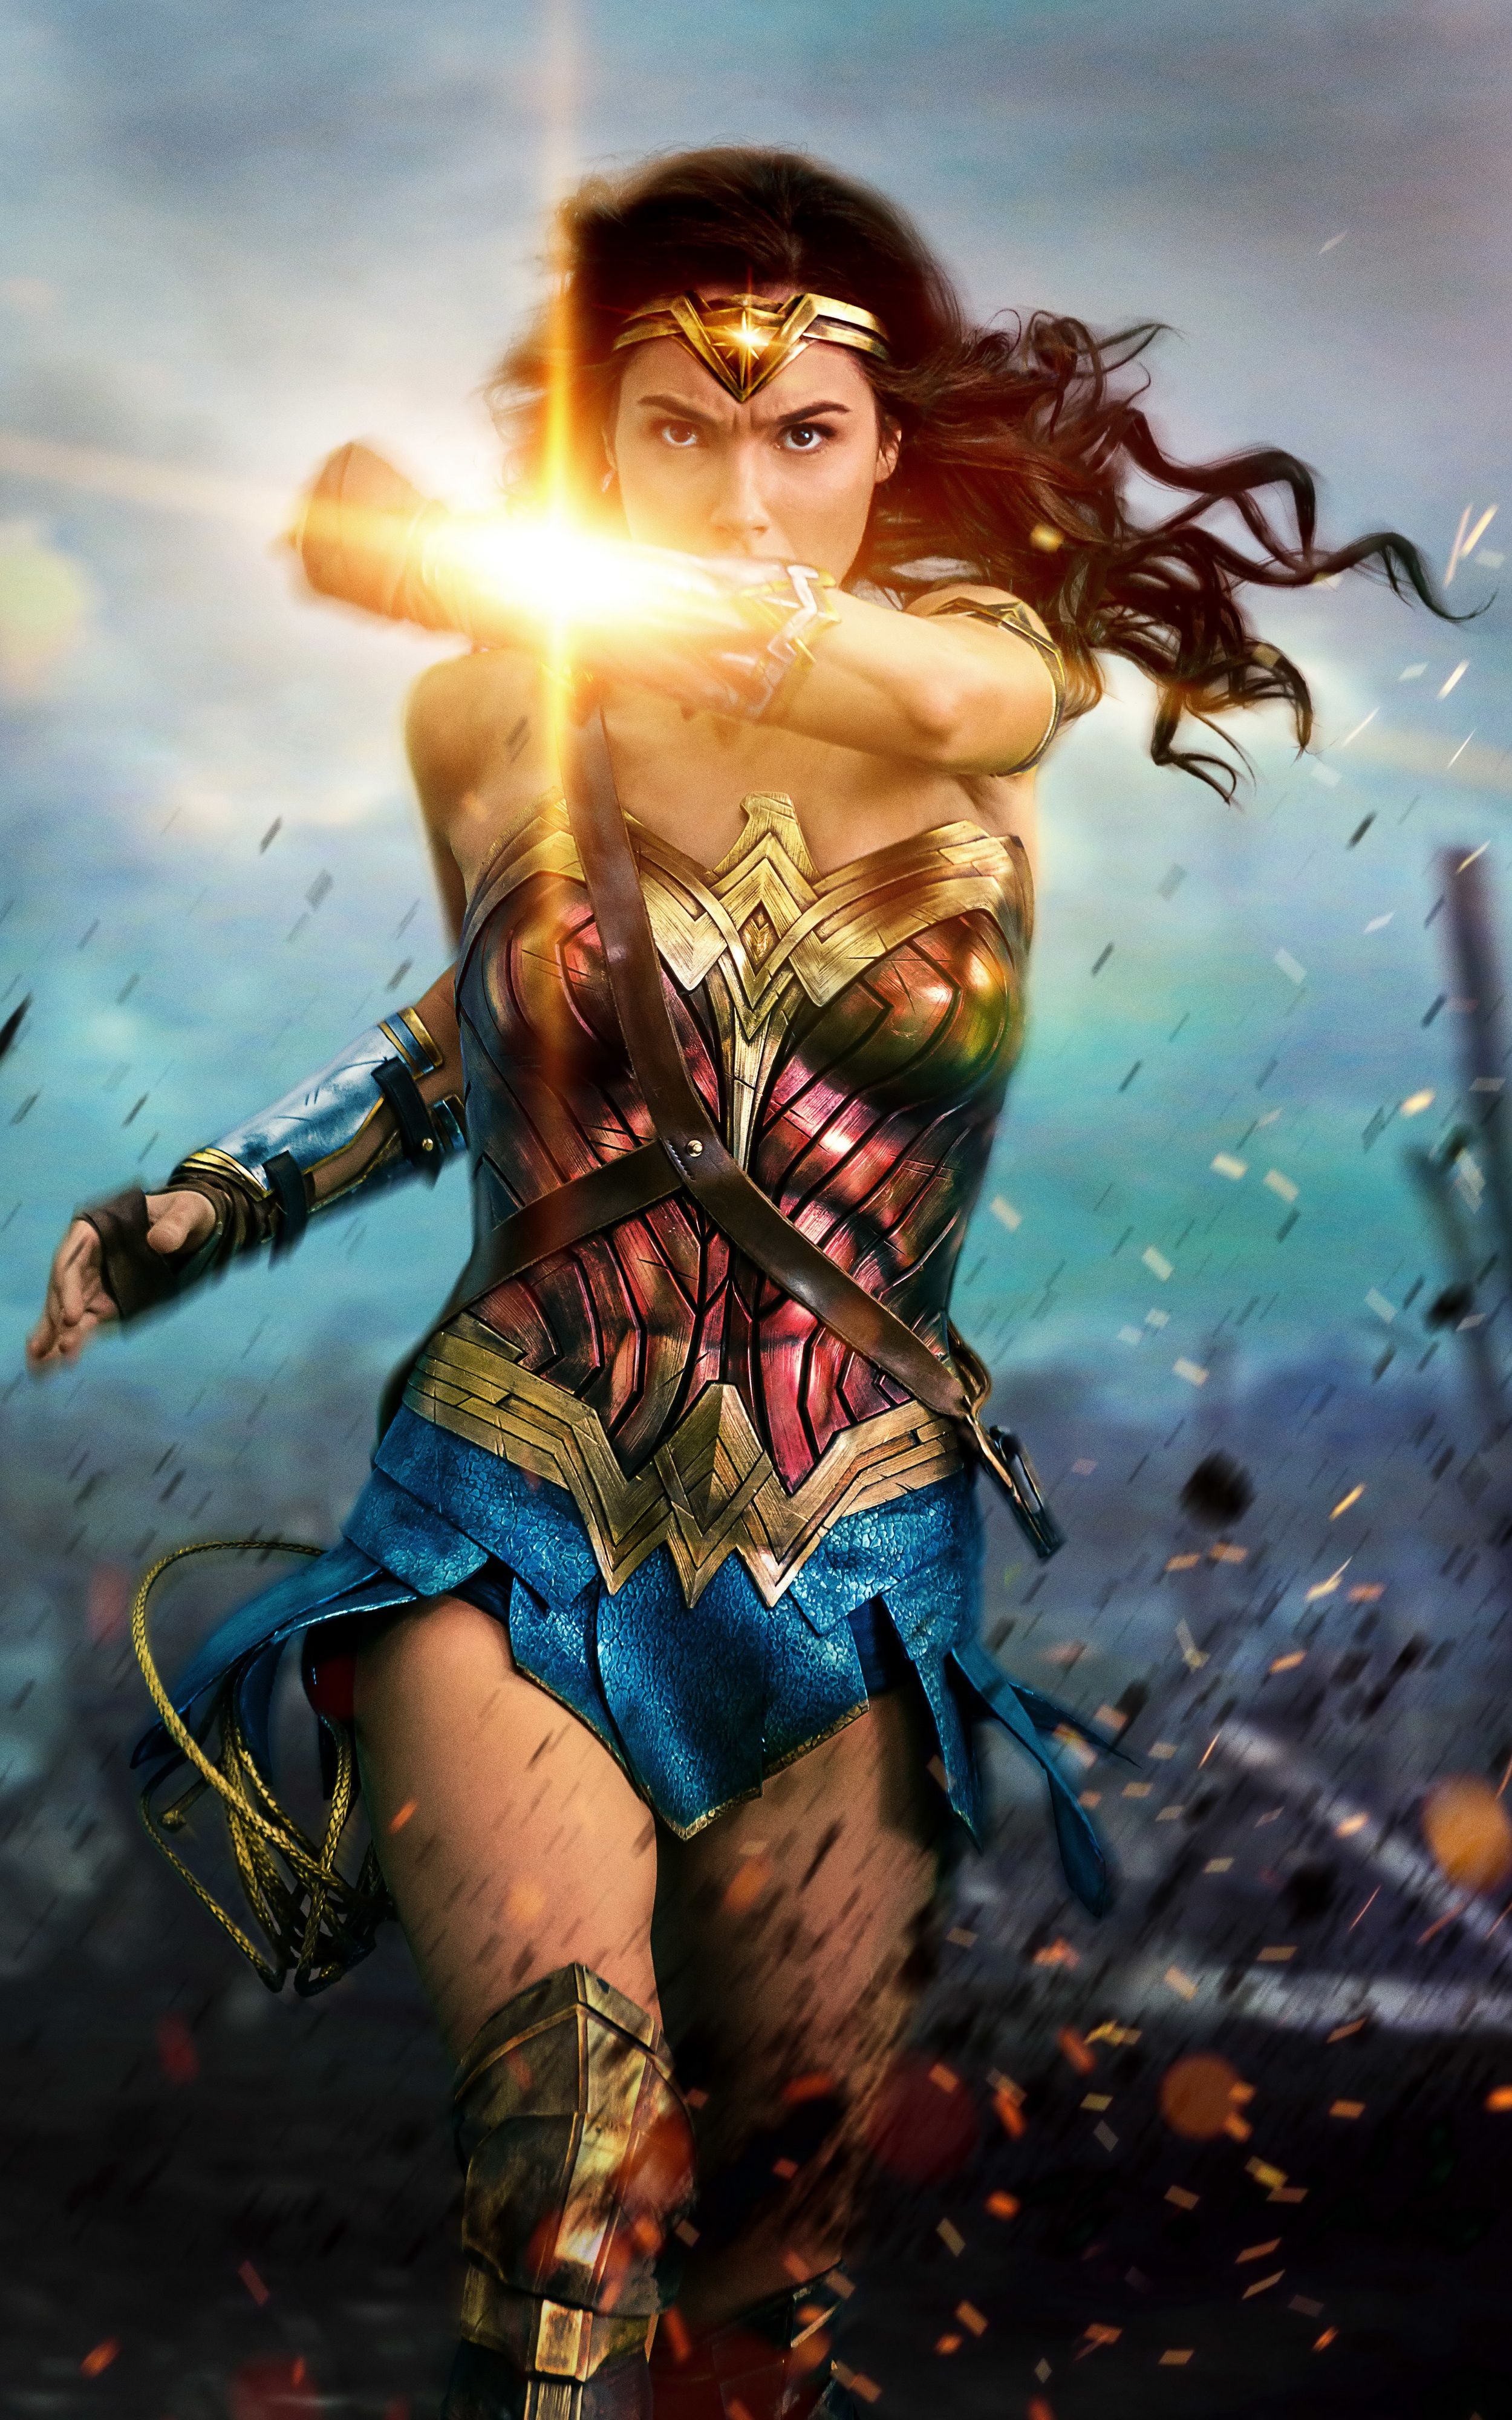 Mobile Wallpaper 134 Movie of the Week: Wonder Woman (22 variations) Life is In Fate. Everything has been Written Down